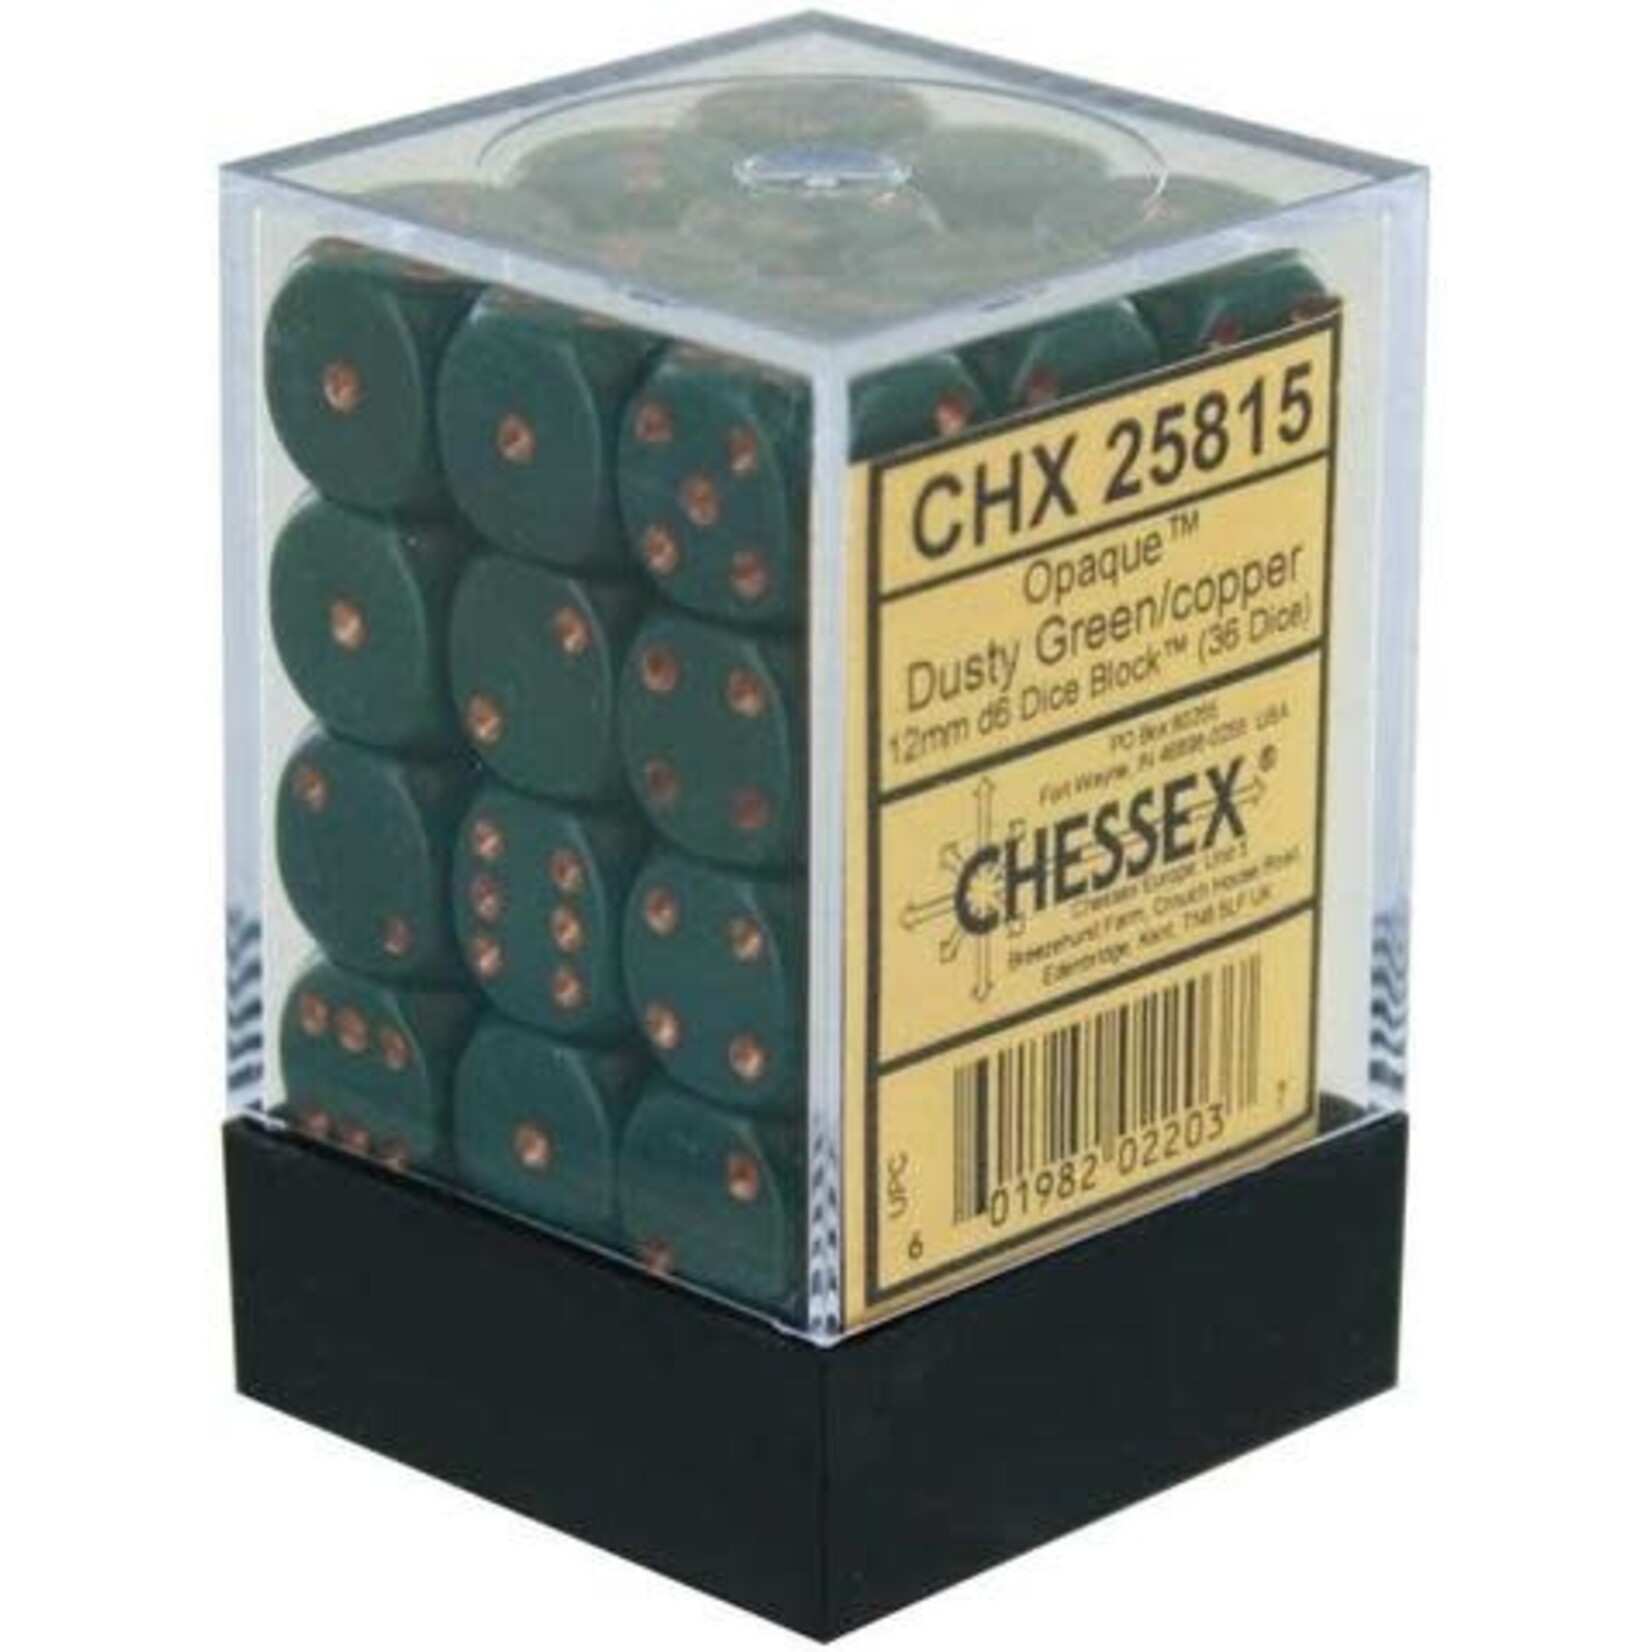 Chessex Opaque 12mm d6 Dusty Green/copper Dice Block™ (36 dice)